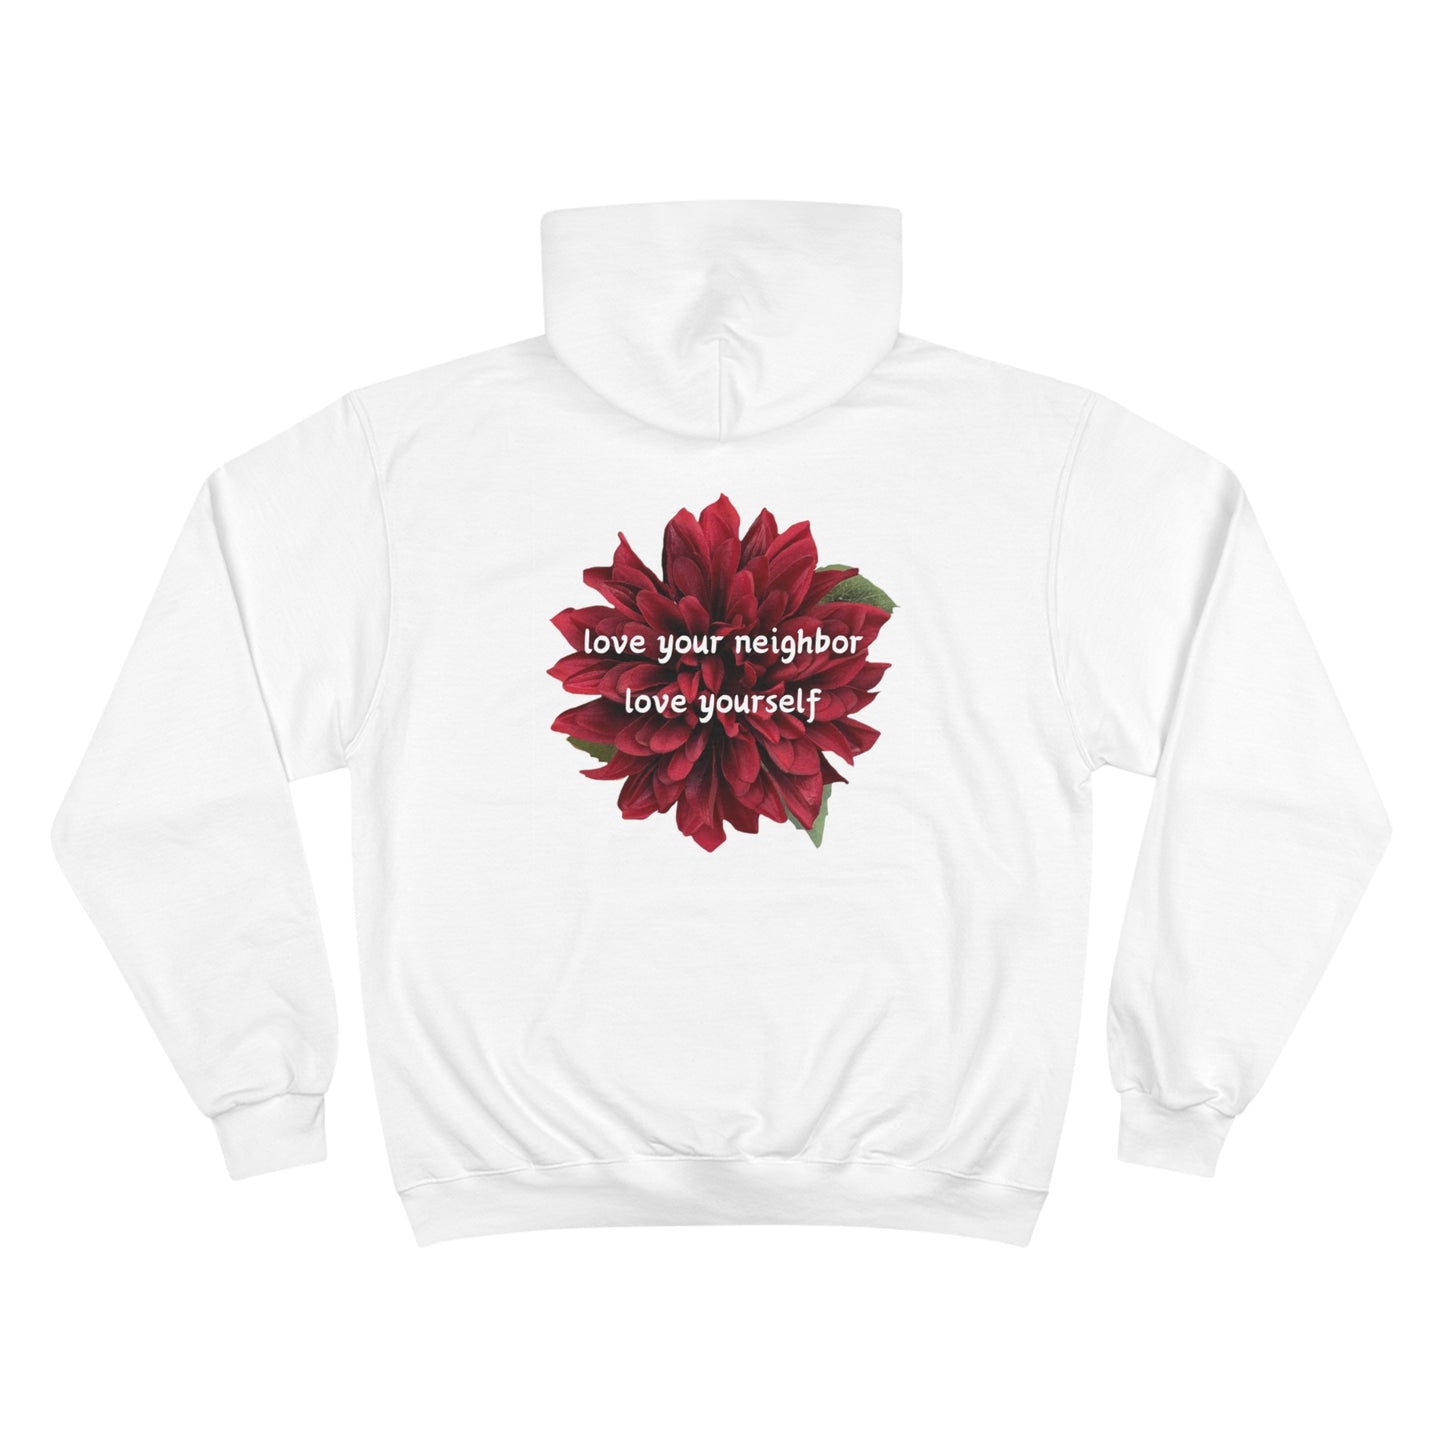 A message of “love your neighbor love yourself” on top of a gorgeous red flower on this very comfortable Champion Hoodie.